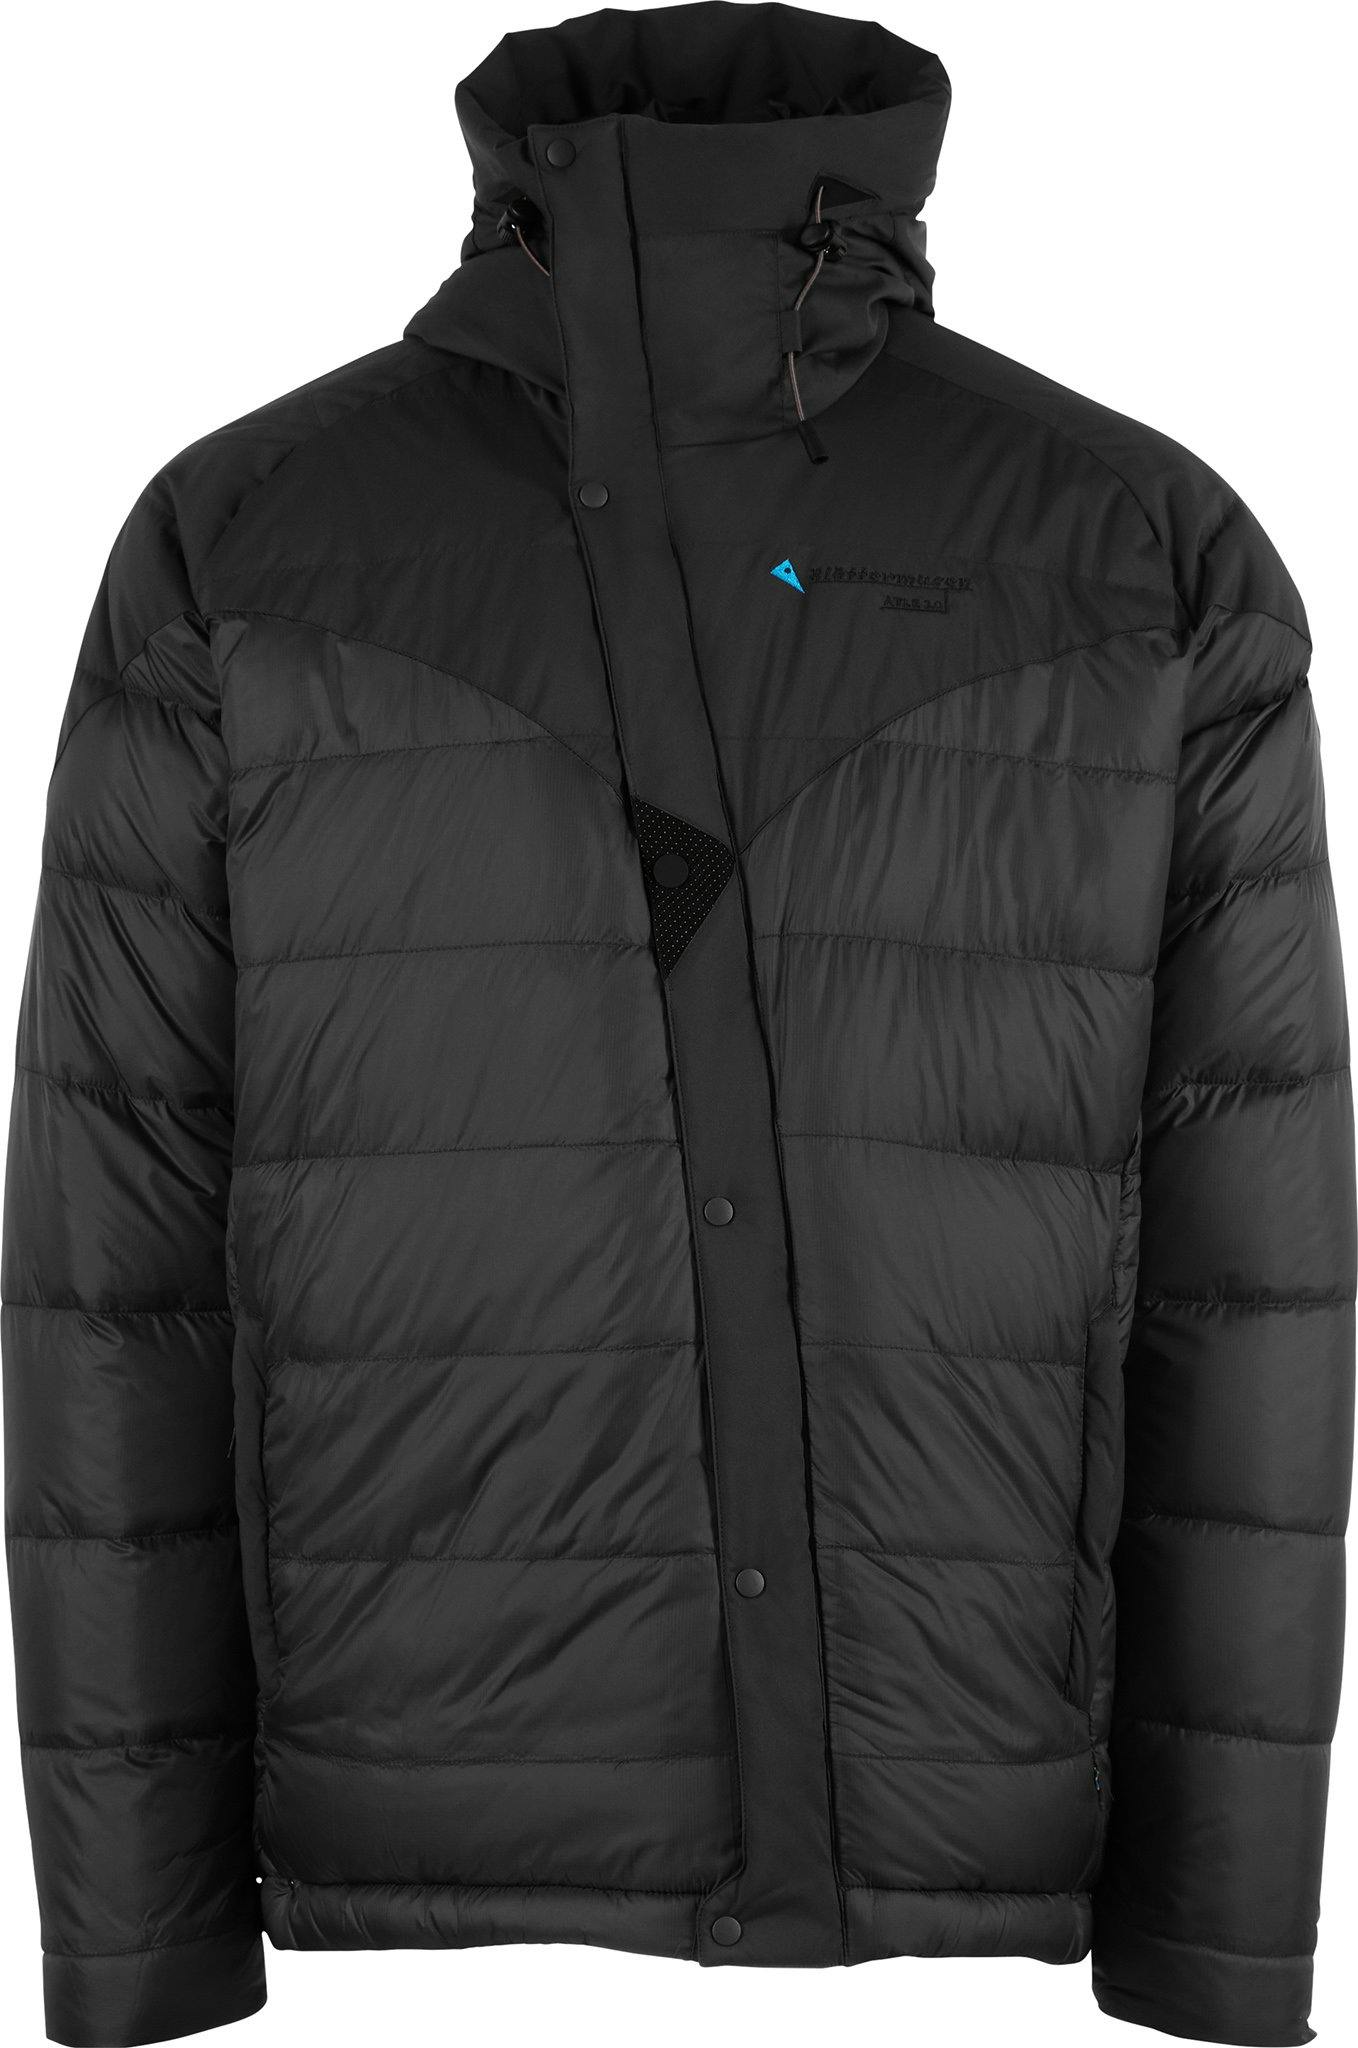 Product image for Atle 3.0 Jacket - Men's